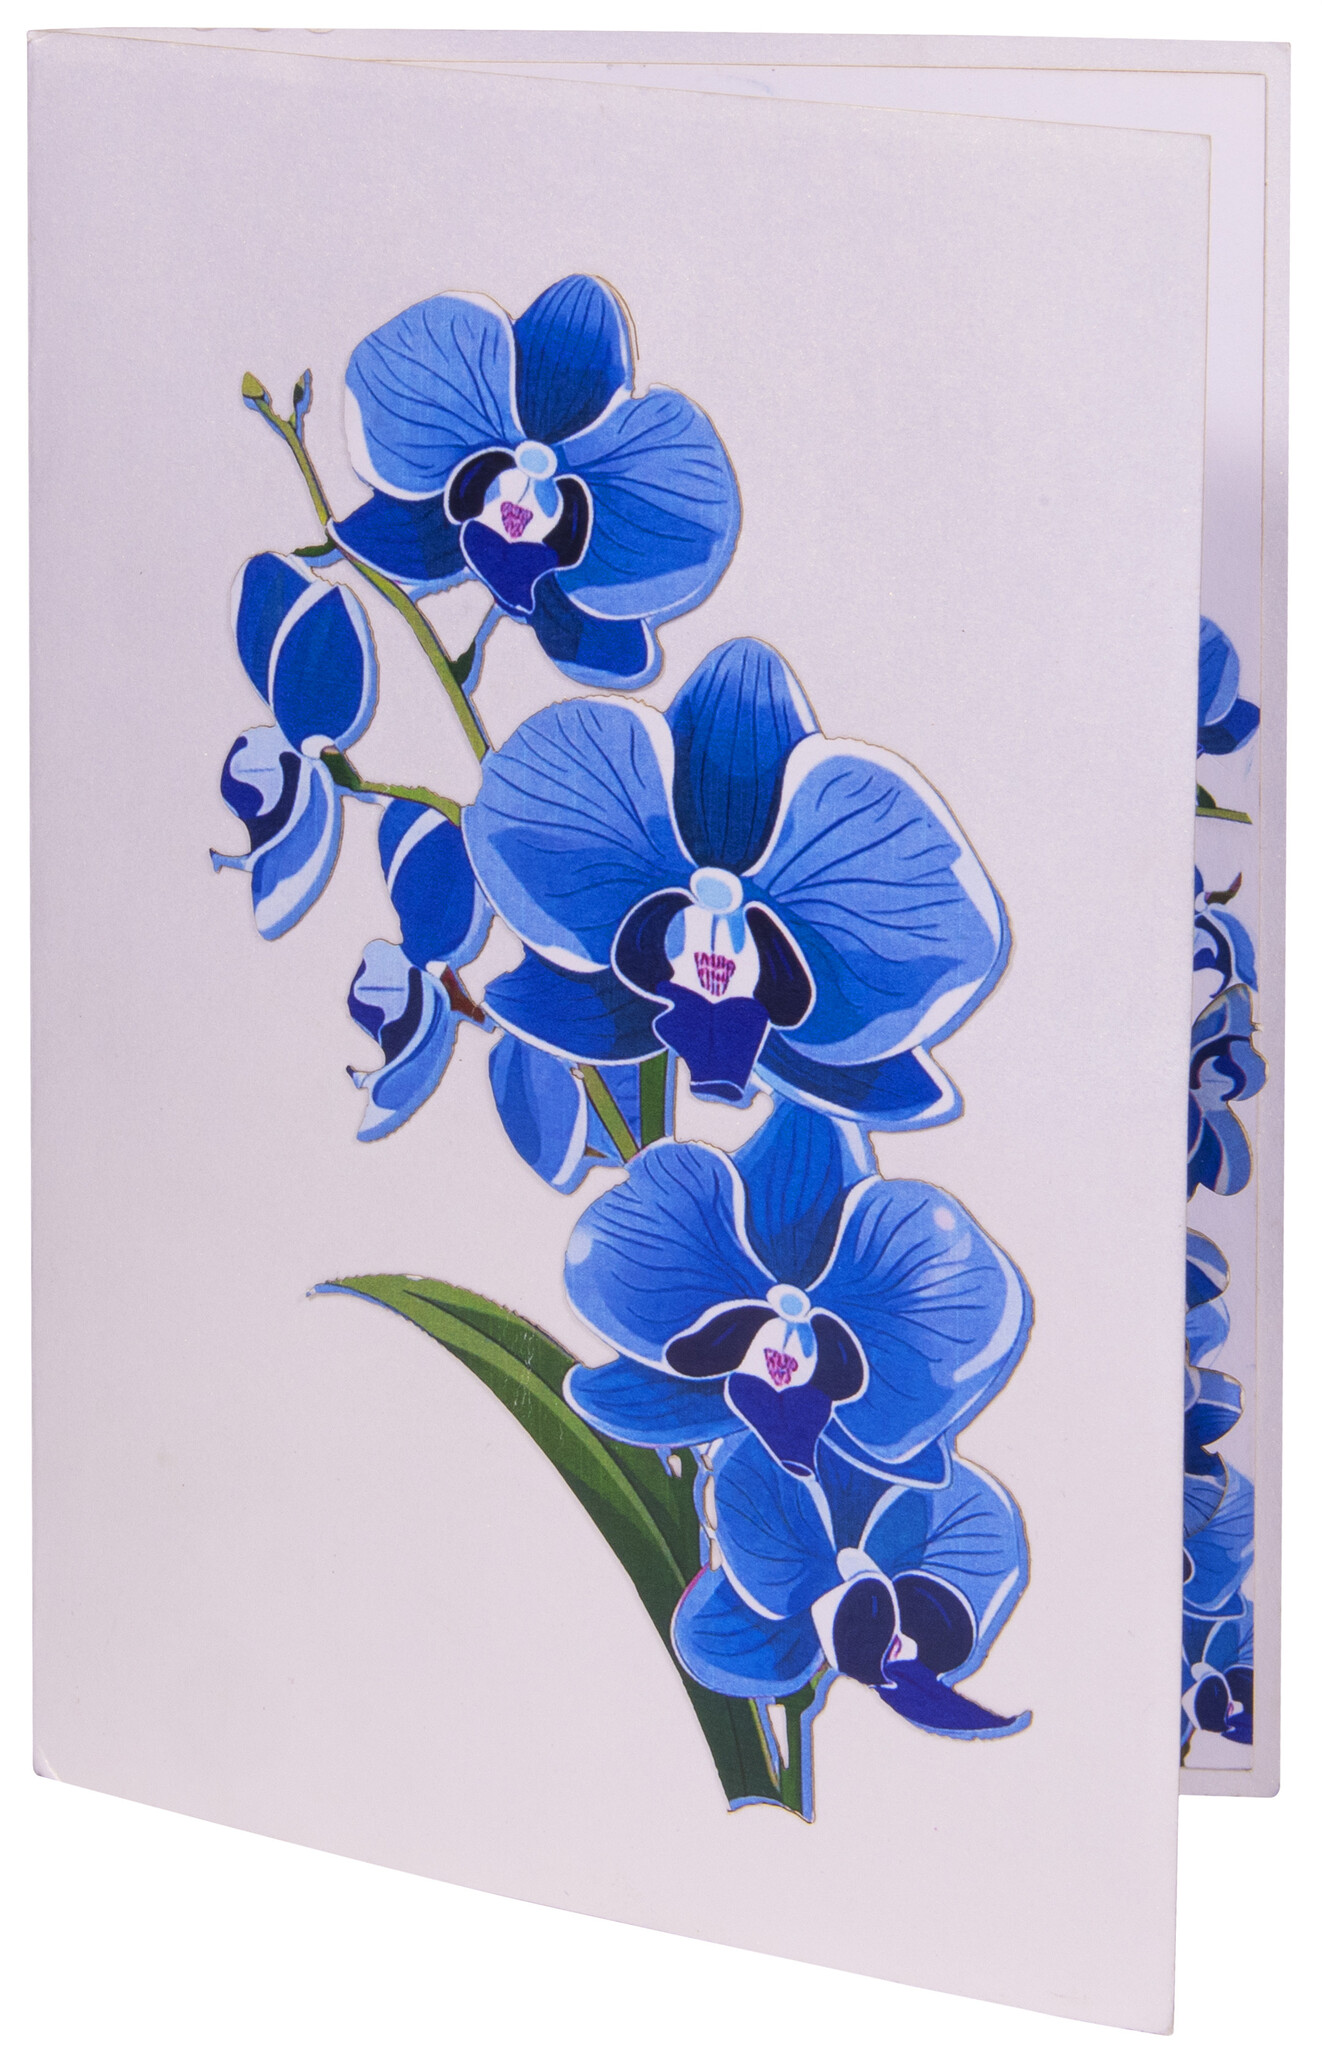 LINPOPUP Pop-Up Card Flower - 3D flower card for birthday, Mother's Day, to say goodbye to a colleague, get well soon or as a thank you card, as a gift of money, orchid, N309